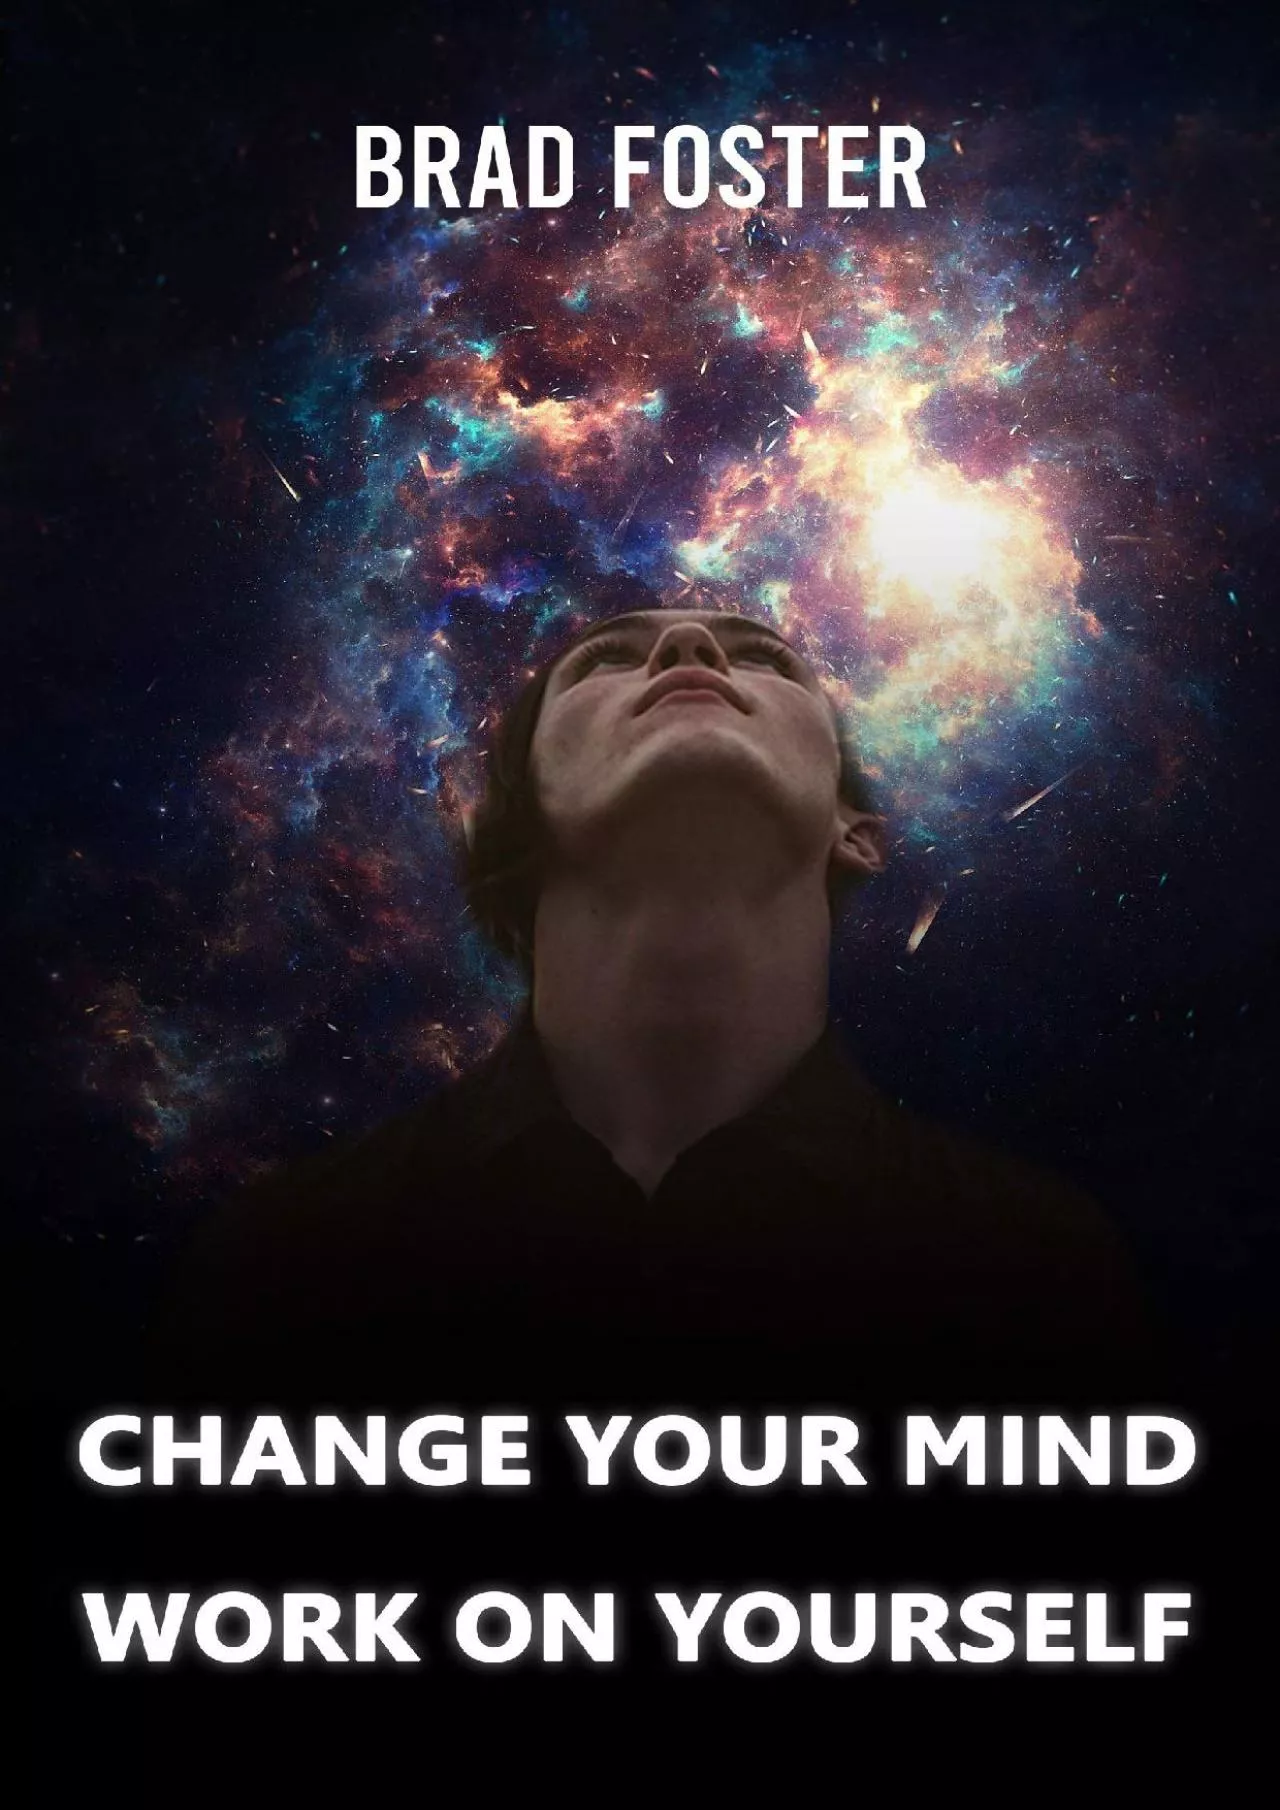 [DOWNLOAD] CHANGE YOUR MIND - WORK ON YOURSELF: How mental coaching can help you reprogram